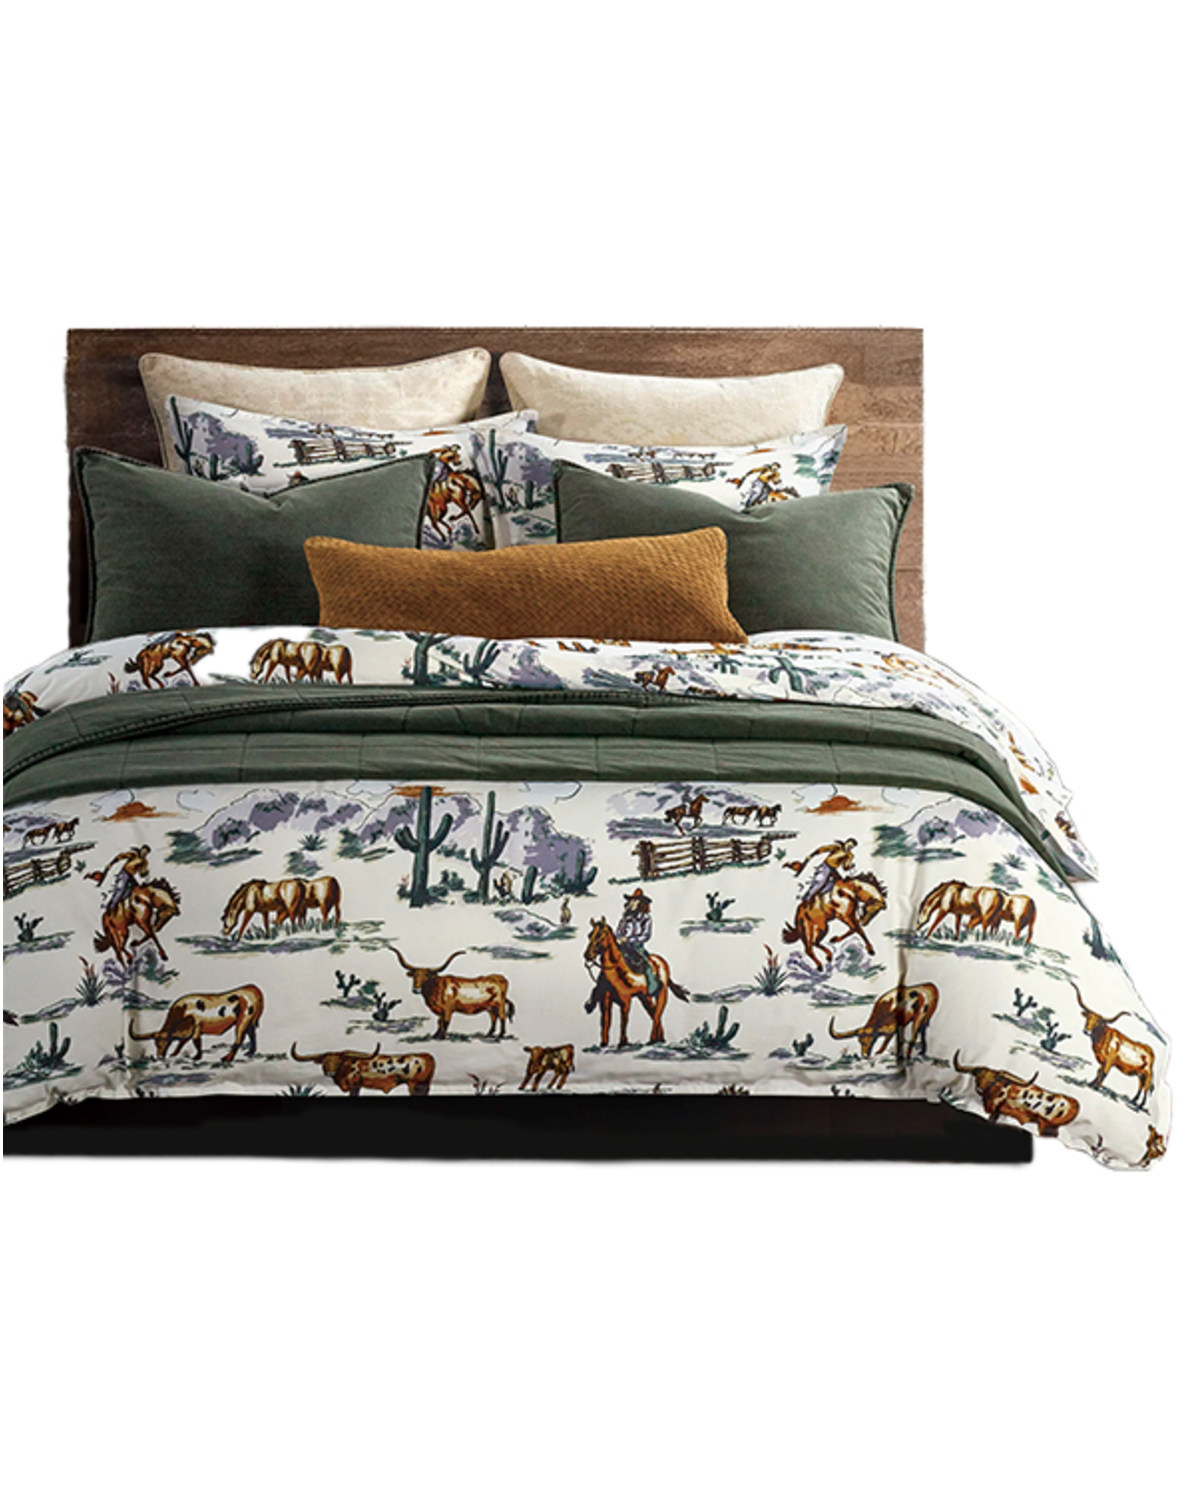 HiEnd Accents 3pc Ranch Life Reversible Comforter Bedding Set